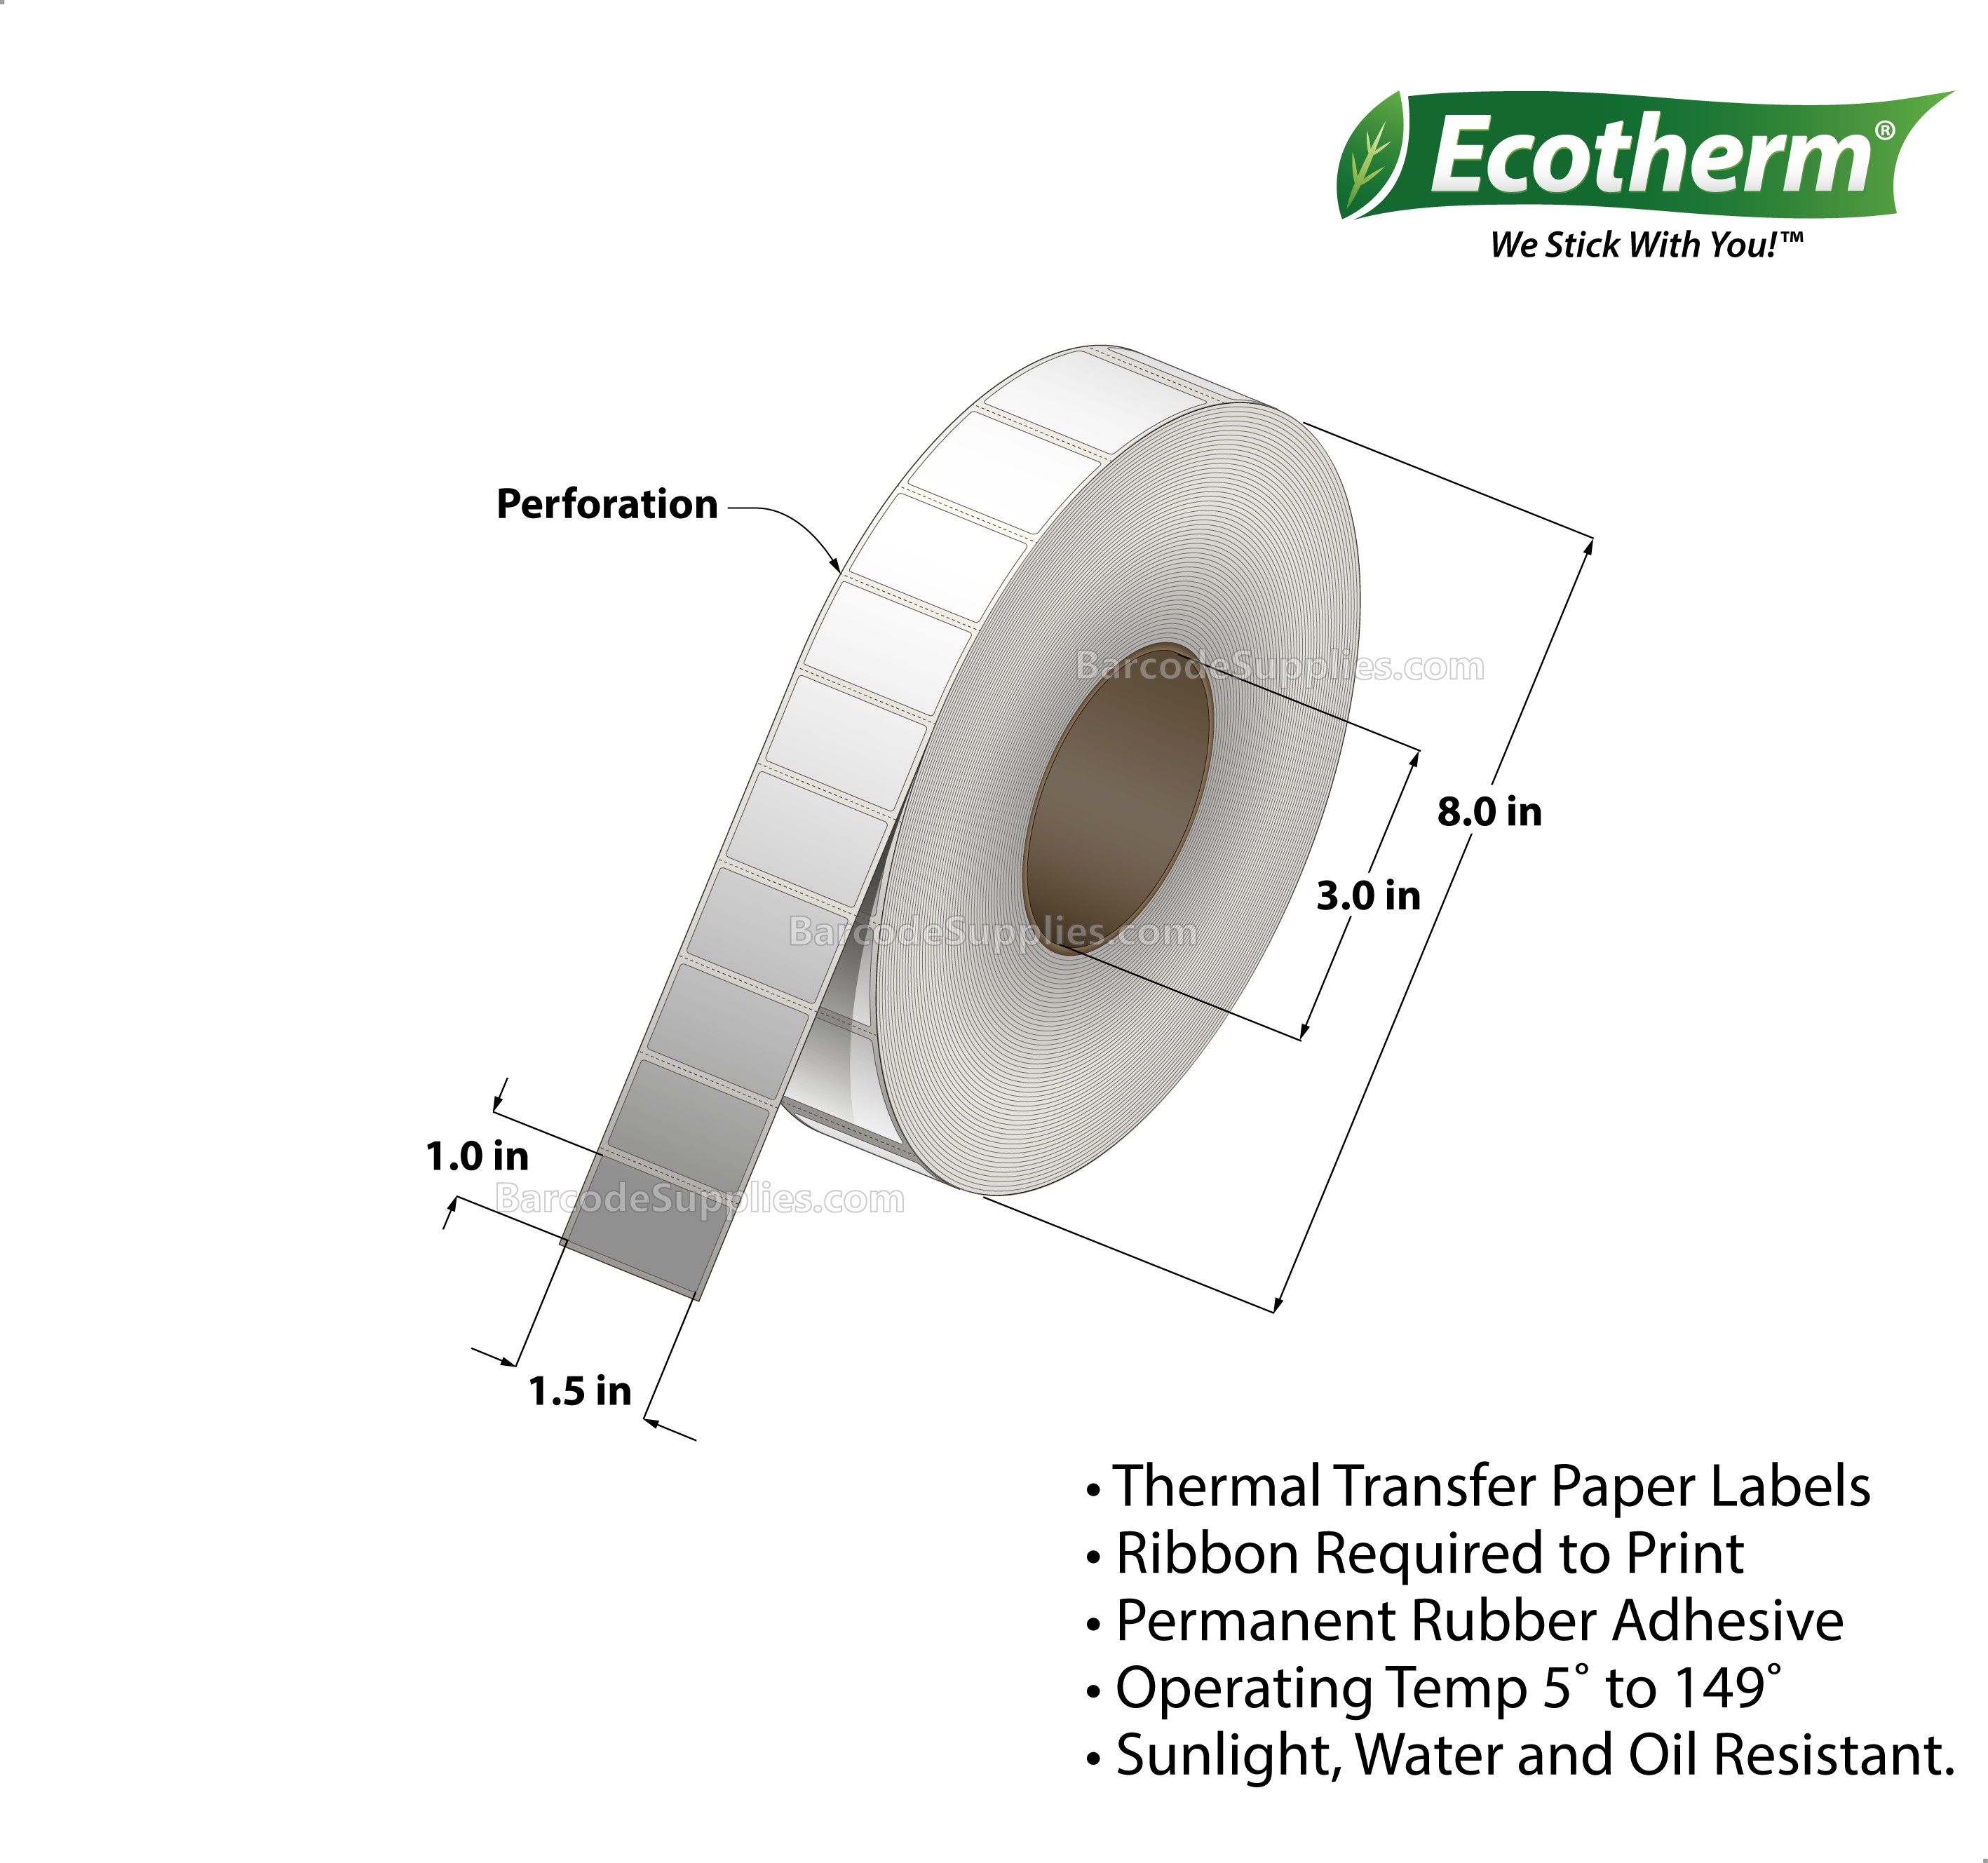 1.5 x 1 Thermal Transfer White Labels With Rubber Adhesive - Perforated - 10800 Labels Per Roll - Carton Of 4 Rolls - 43200 Labels Total - MPN: ECOTHERM28106-4